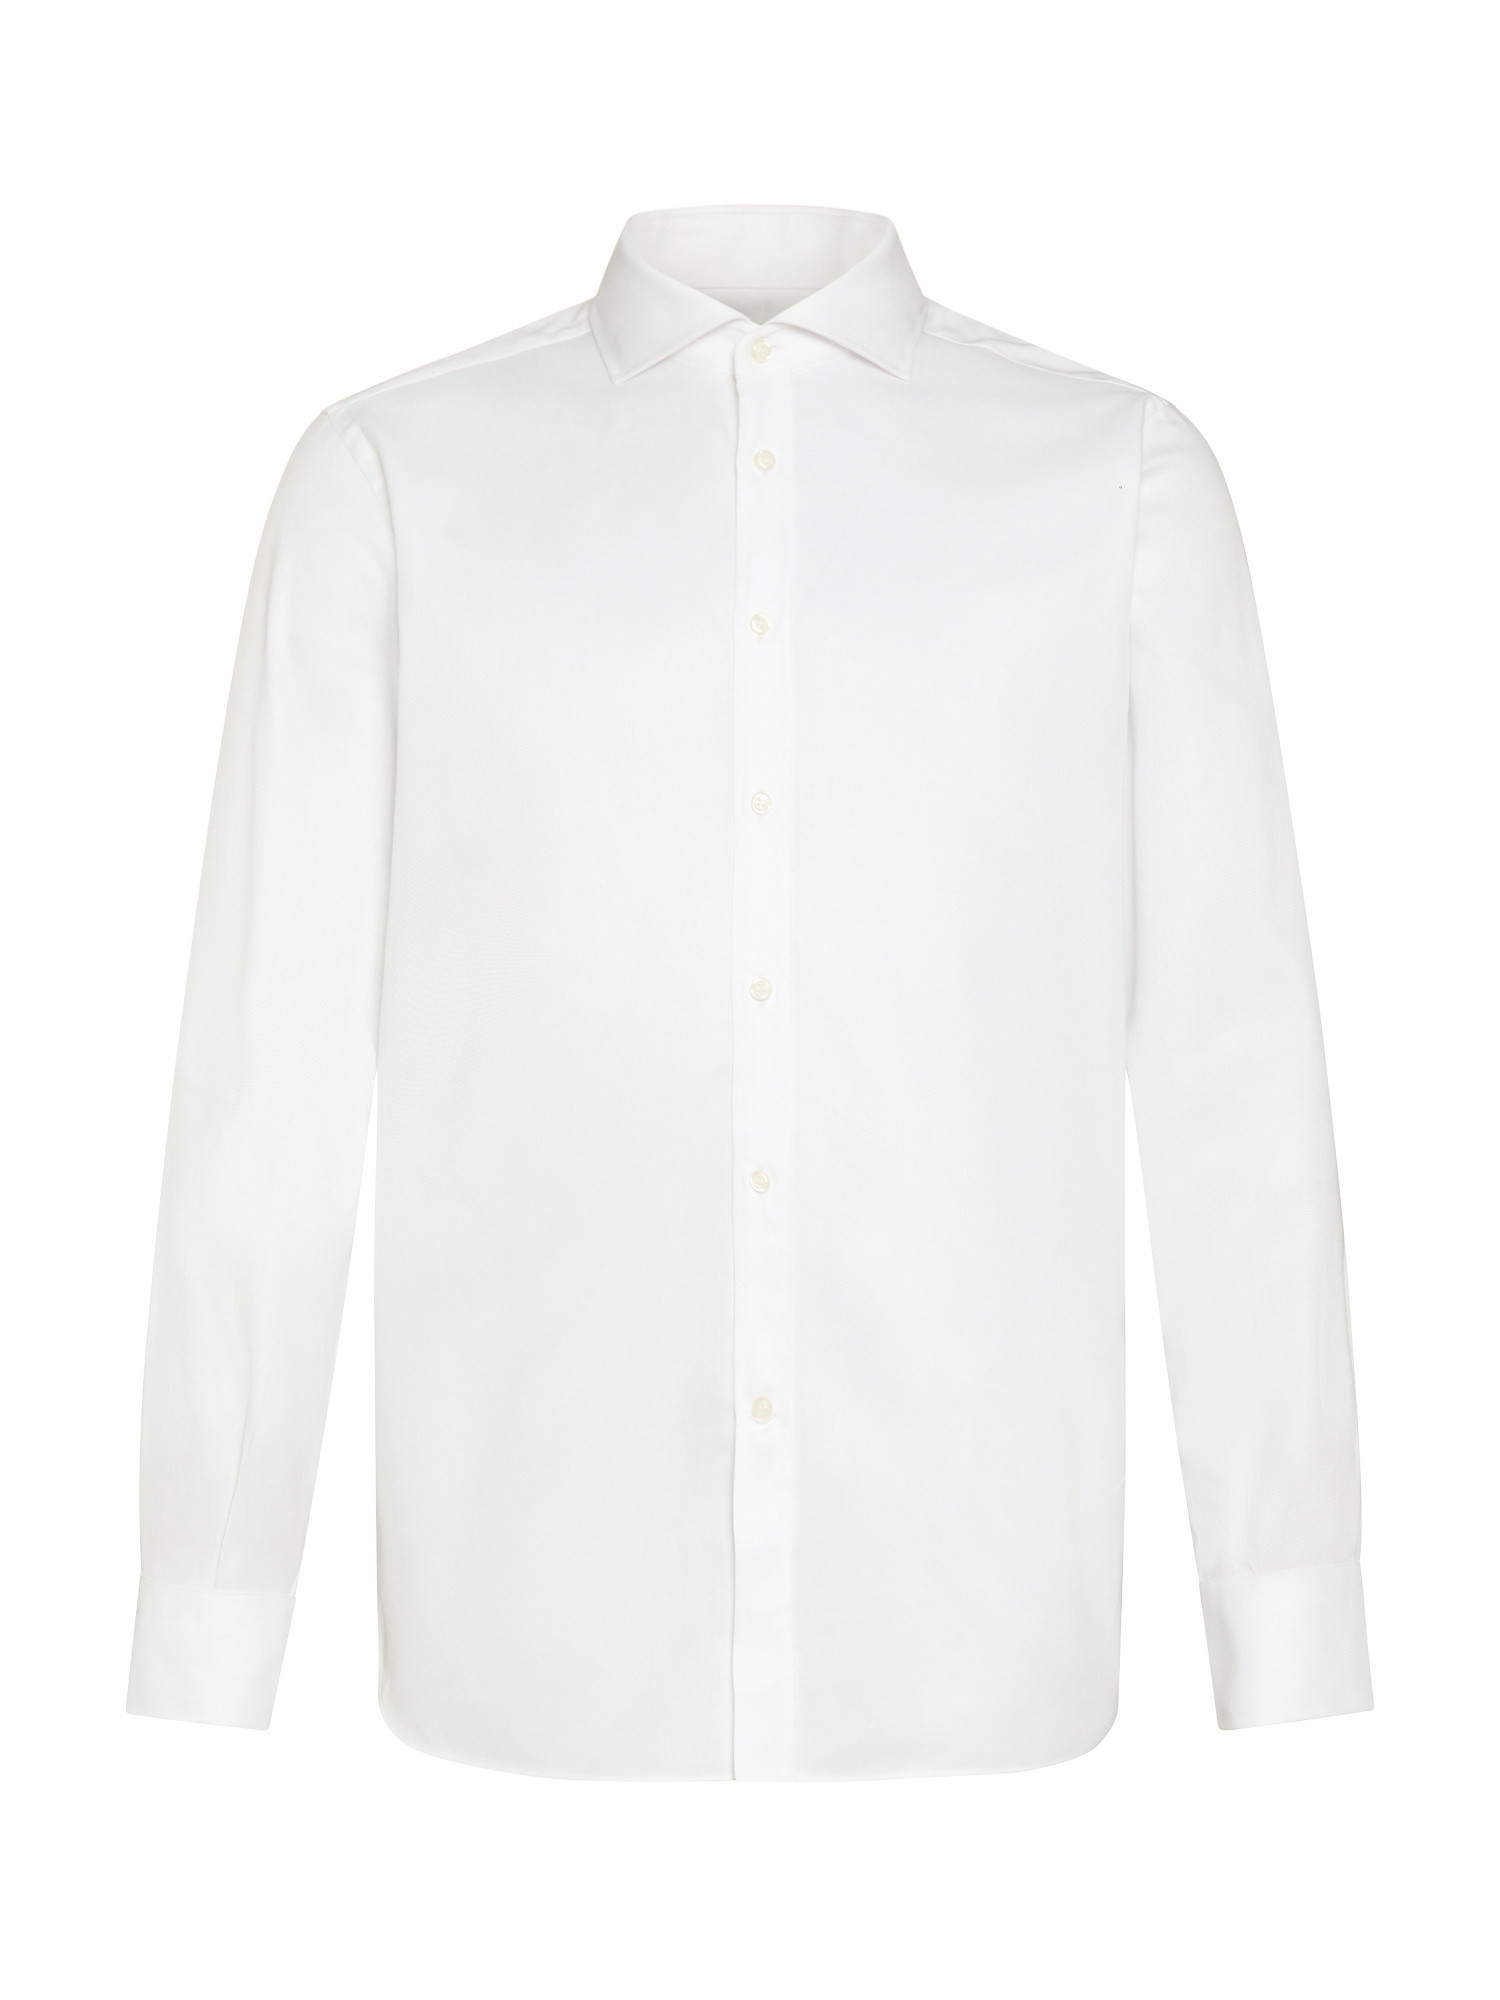 Luca D'Altieri - Regular fit shirt in fine cotton oxford, White, large image number 1